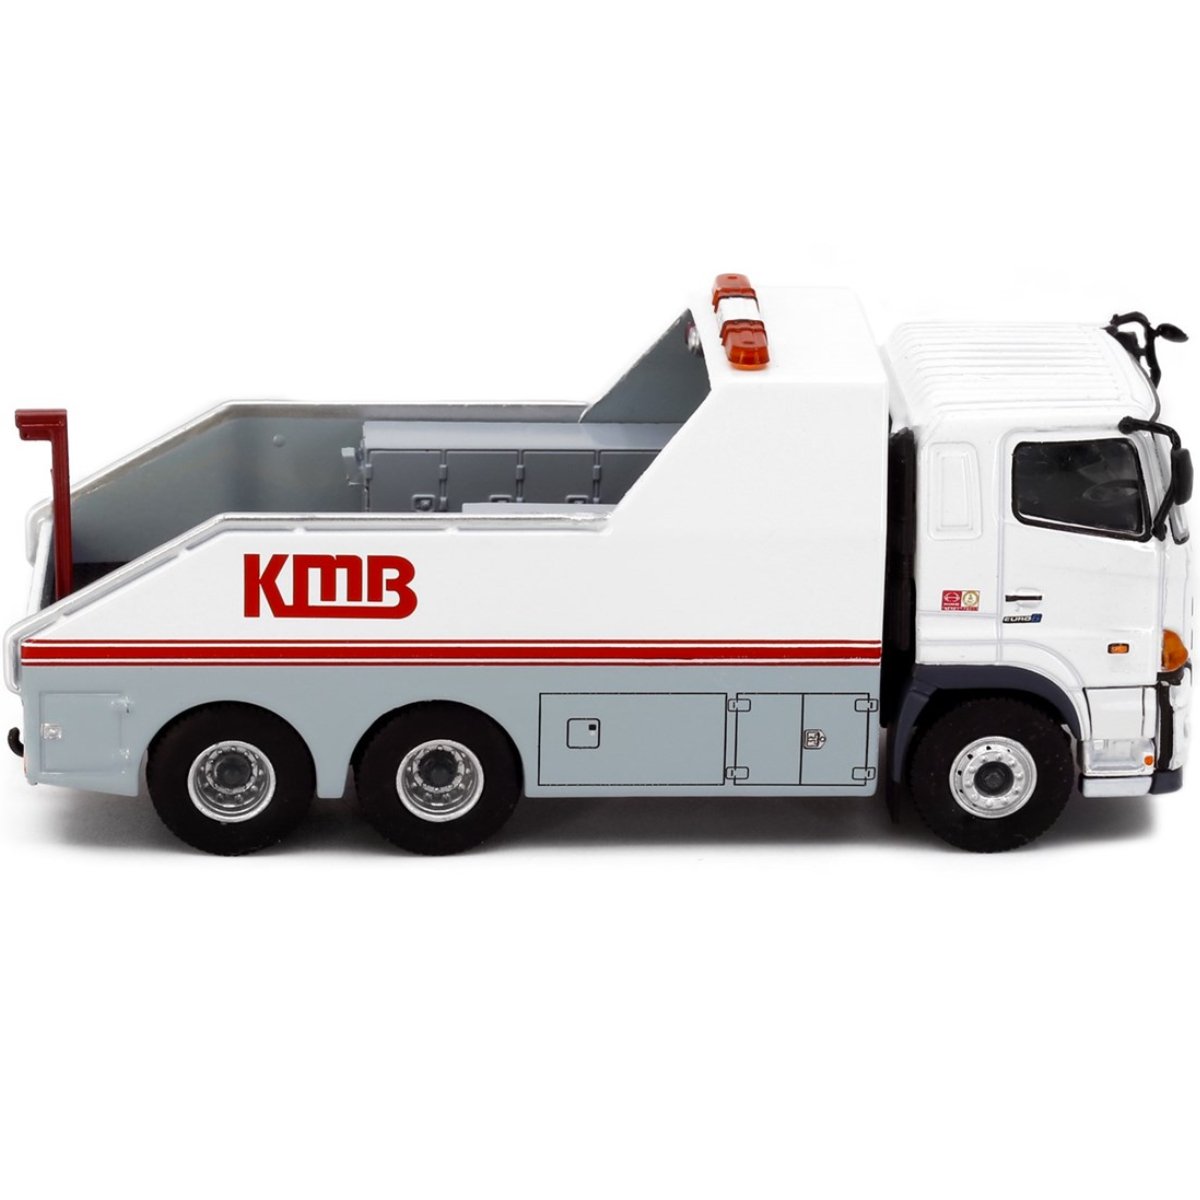 Tiny Models KMB HINO 700 Tow Truck (1:76 Scale) - Phillips Hobbies